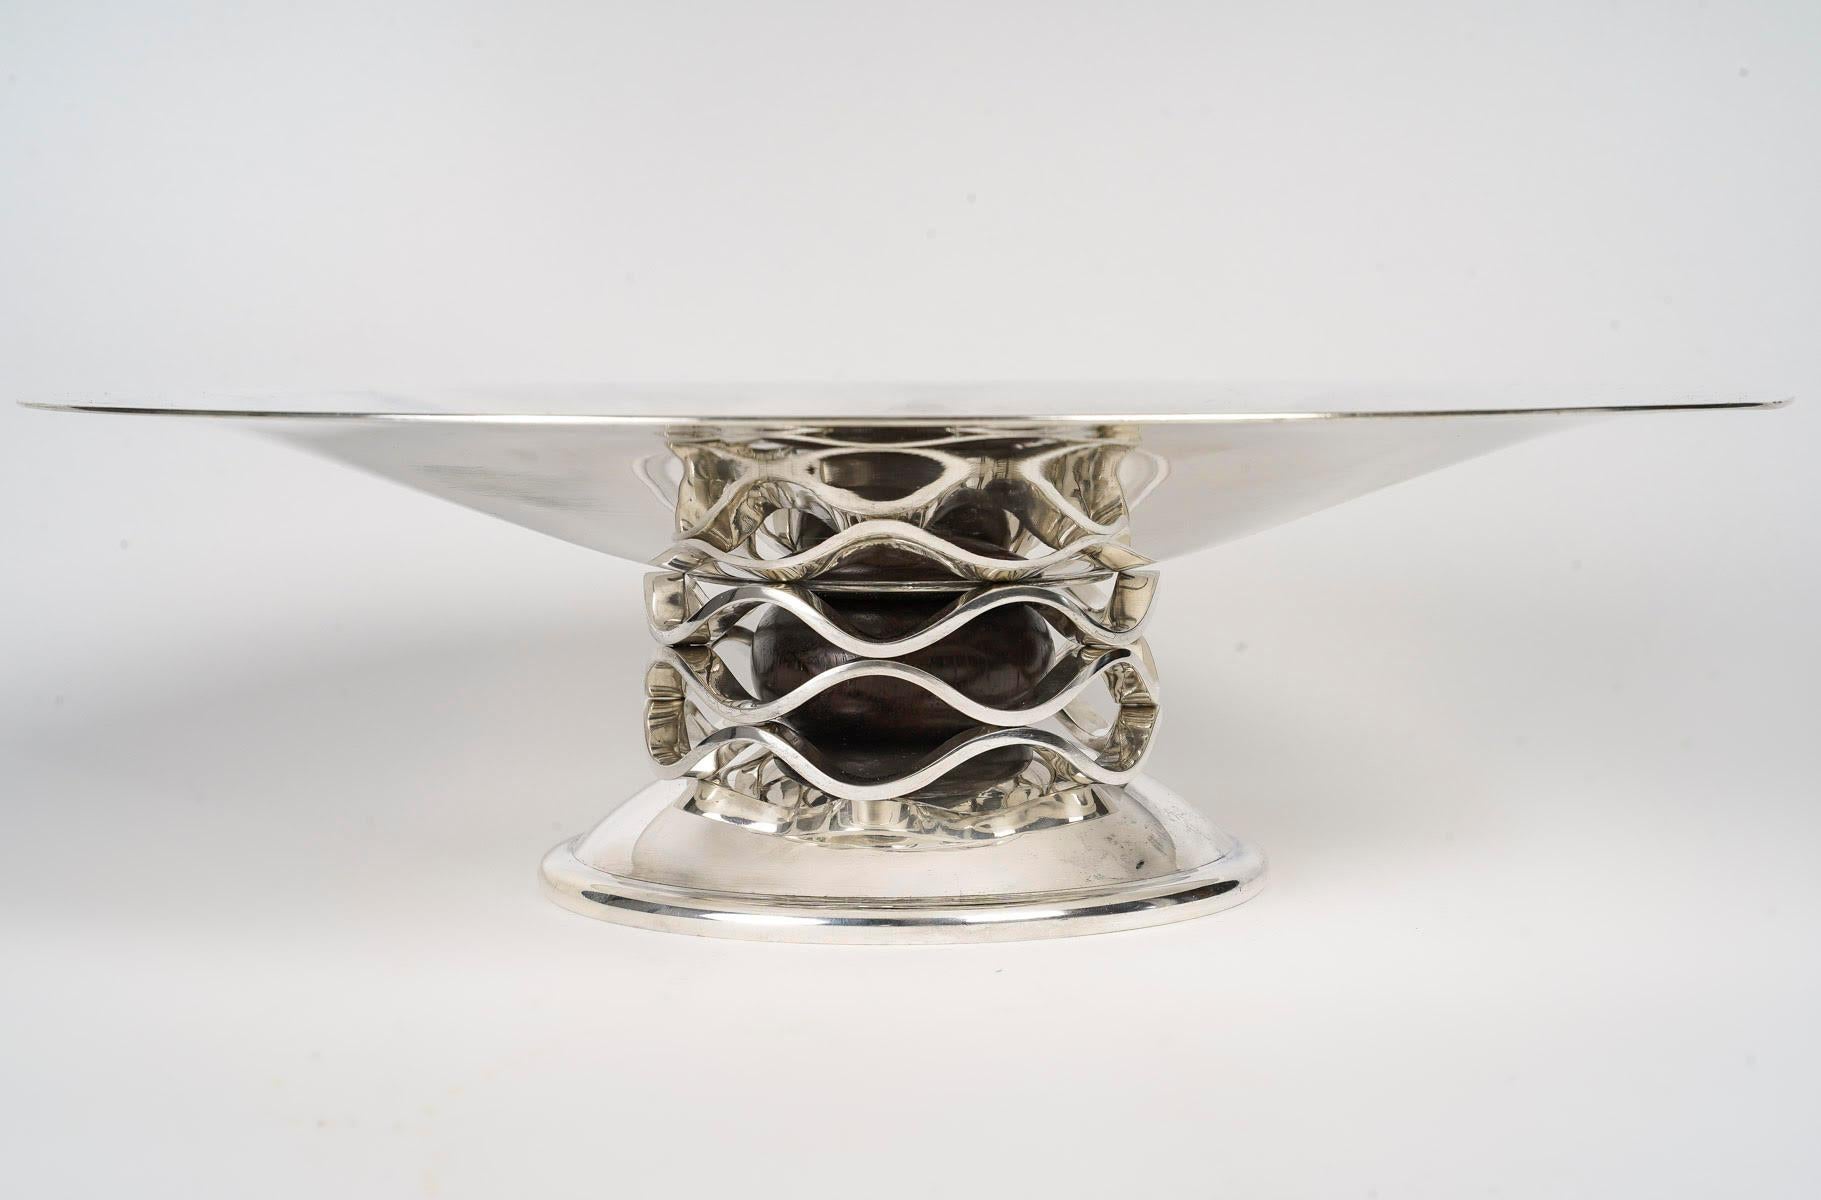 1930 Art Deco silver plated fruit bowl by Christofle.

Silver-plated metal and solid wood bowl signed by the House of Christofle, circa 1930, Art Deco period.  
d: 35cm, h: 10cm